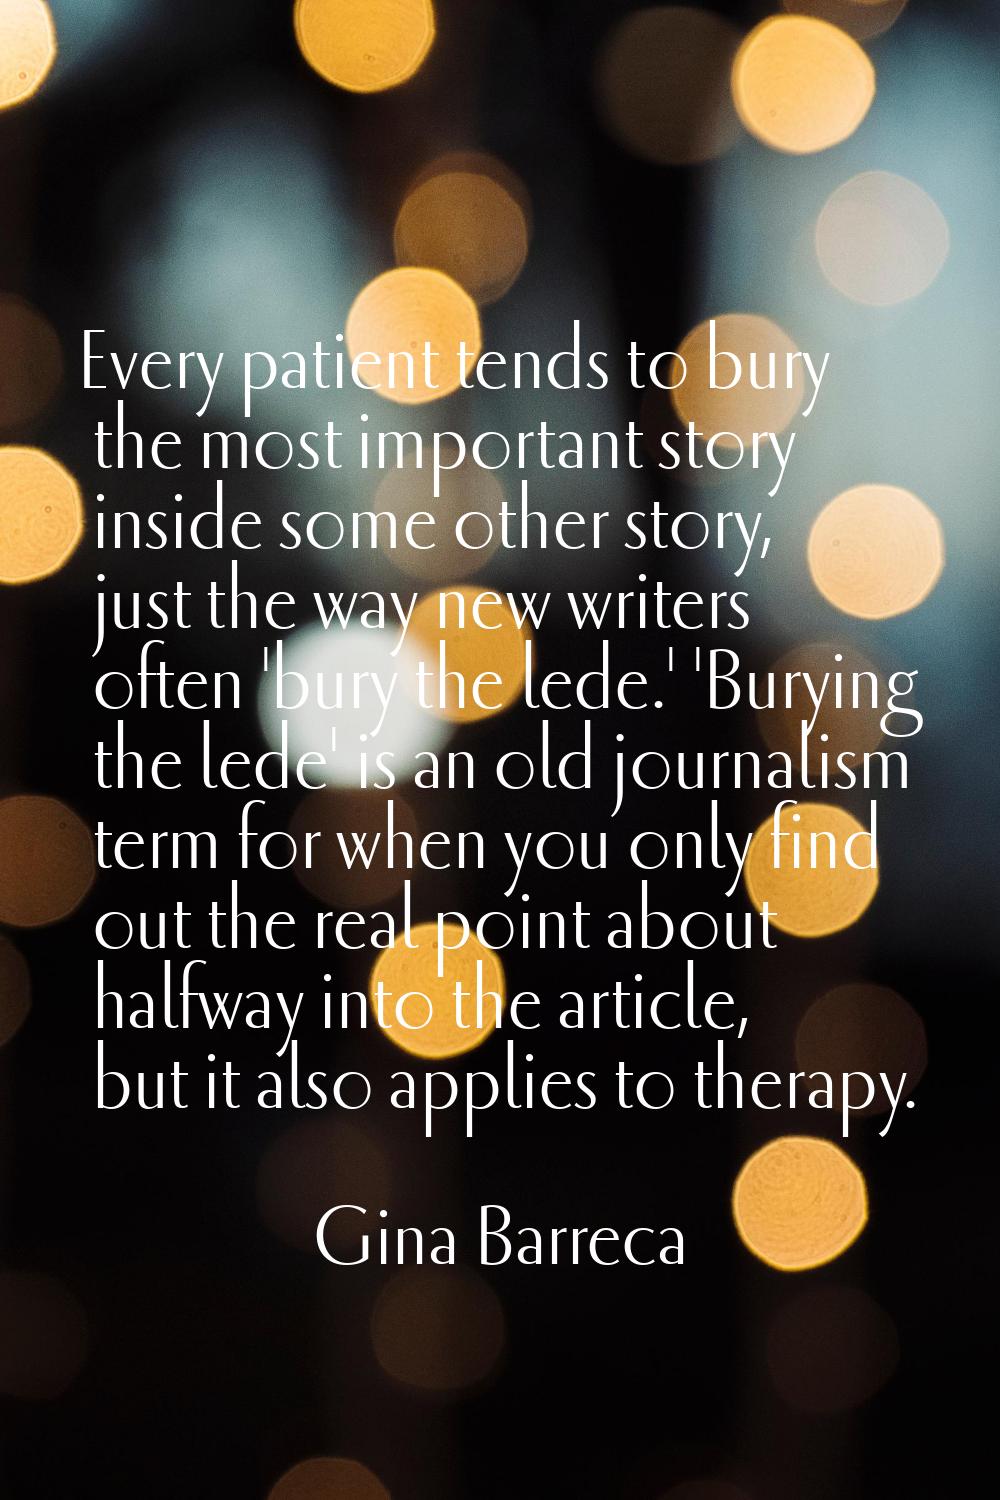 Every patient tends to bury the most important story inside some other story, just the way new writ